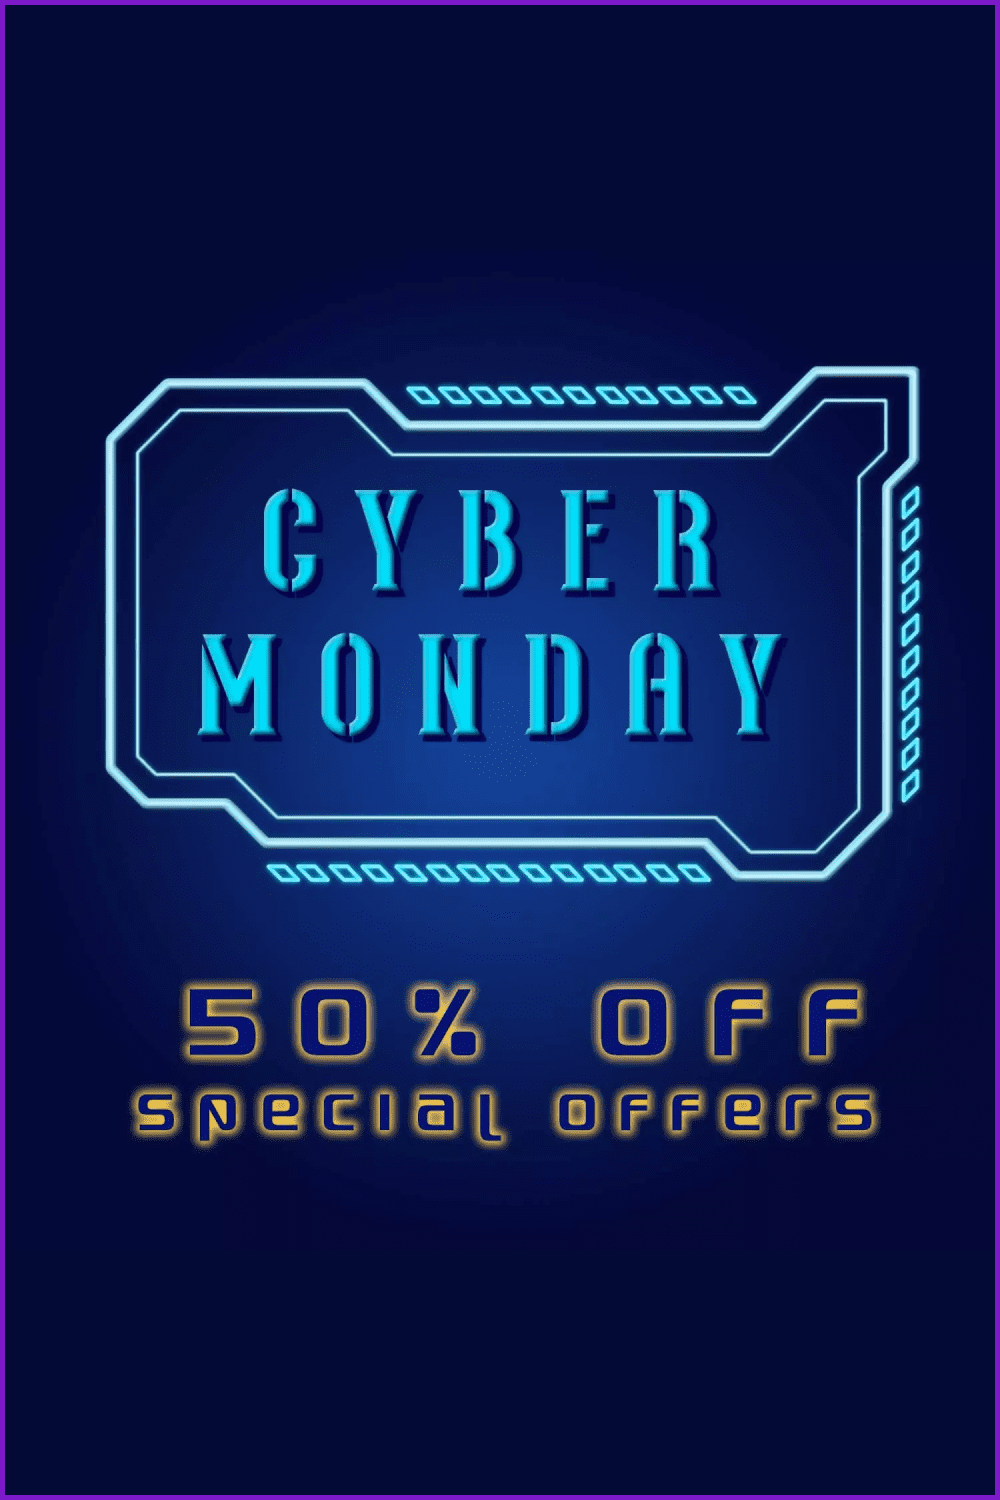 Banner for Cyber Monday with blue text on blue background.